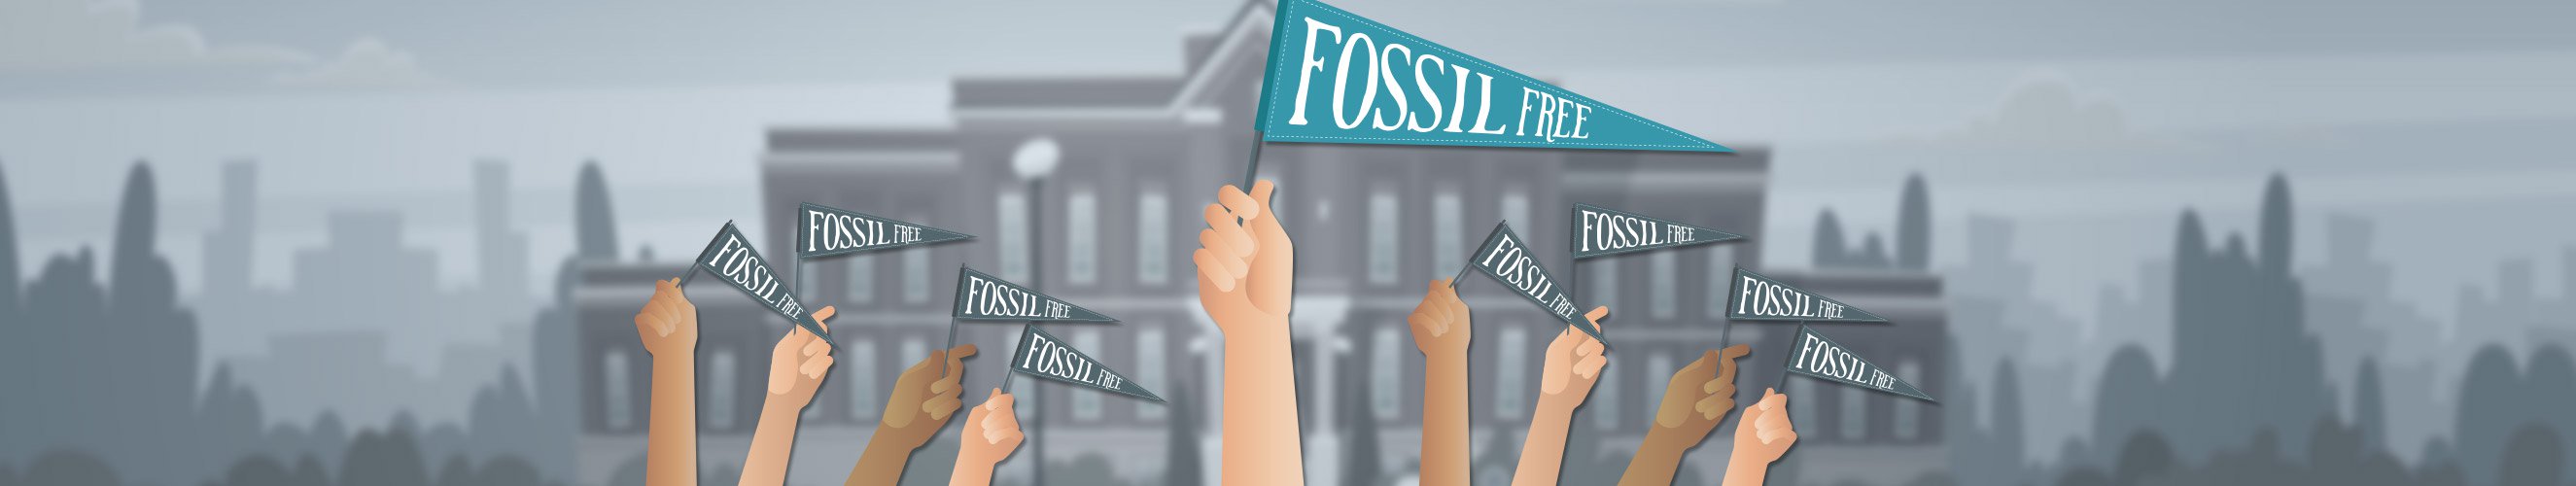 Demonstration for a fossil-free economy